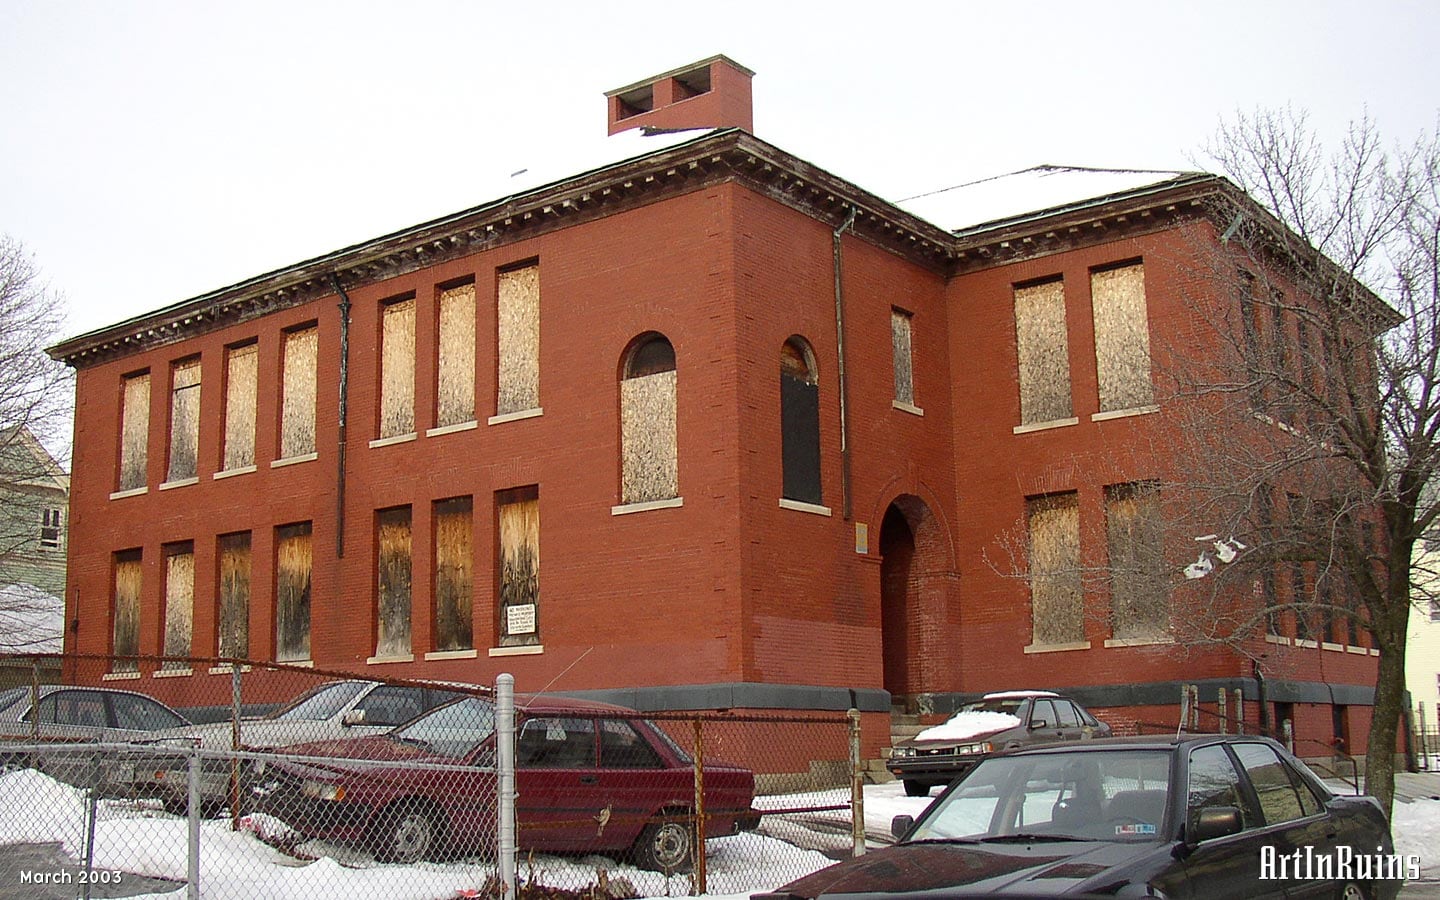 A square plan, red brick, two story former grade school building. Windows were rectangular with granite sils. Two entrances — one for boys, one for girls — are on opposite sides of the building. A cross gable shingled roof with a simple wooden cornice beneath it was on top.